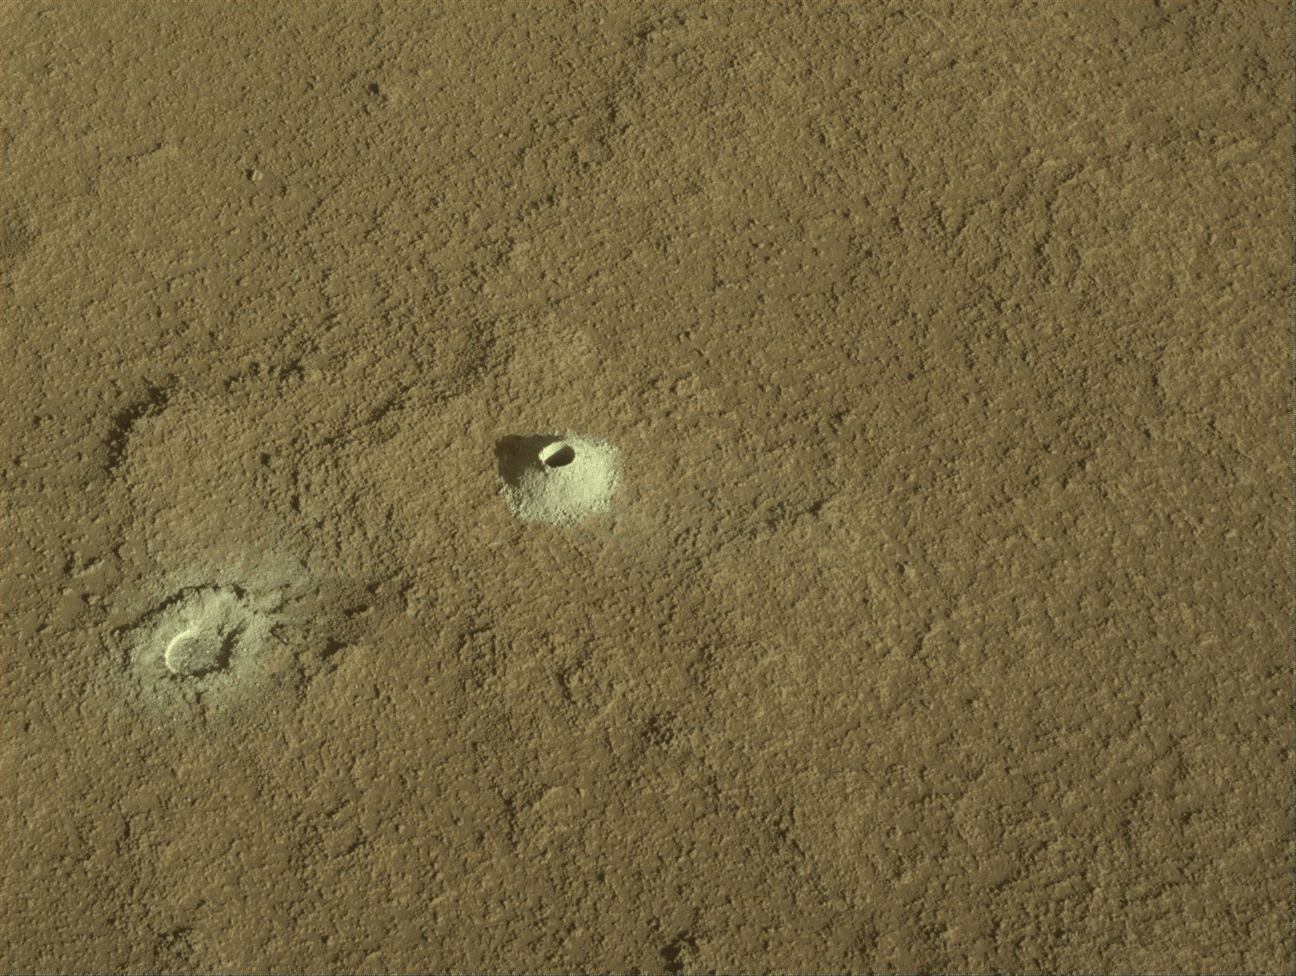 Image taken was taken by the Mars Perseverance rover after collecting the rock sample 23 at Lefroy Bay. There is a drill hole in the center of the martian soil with an abrasion patch at the bottom left.